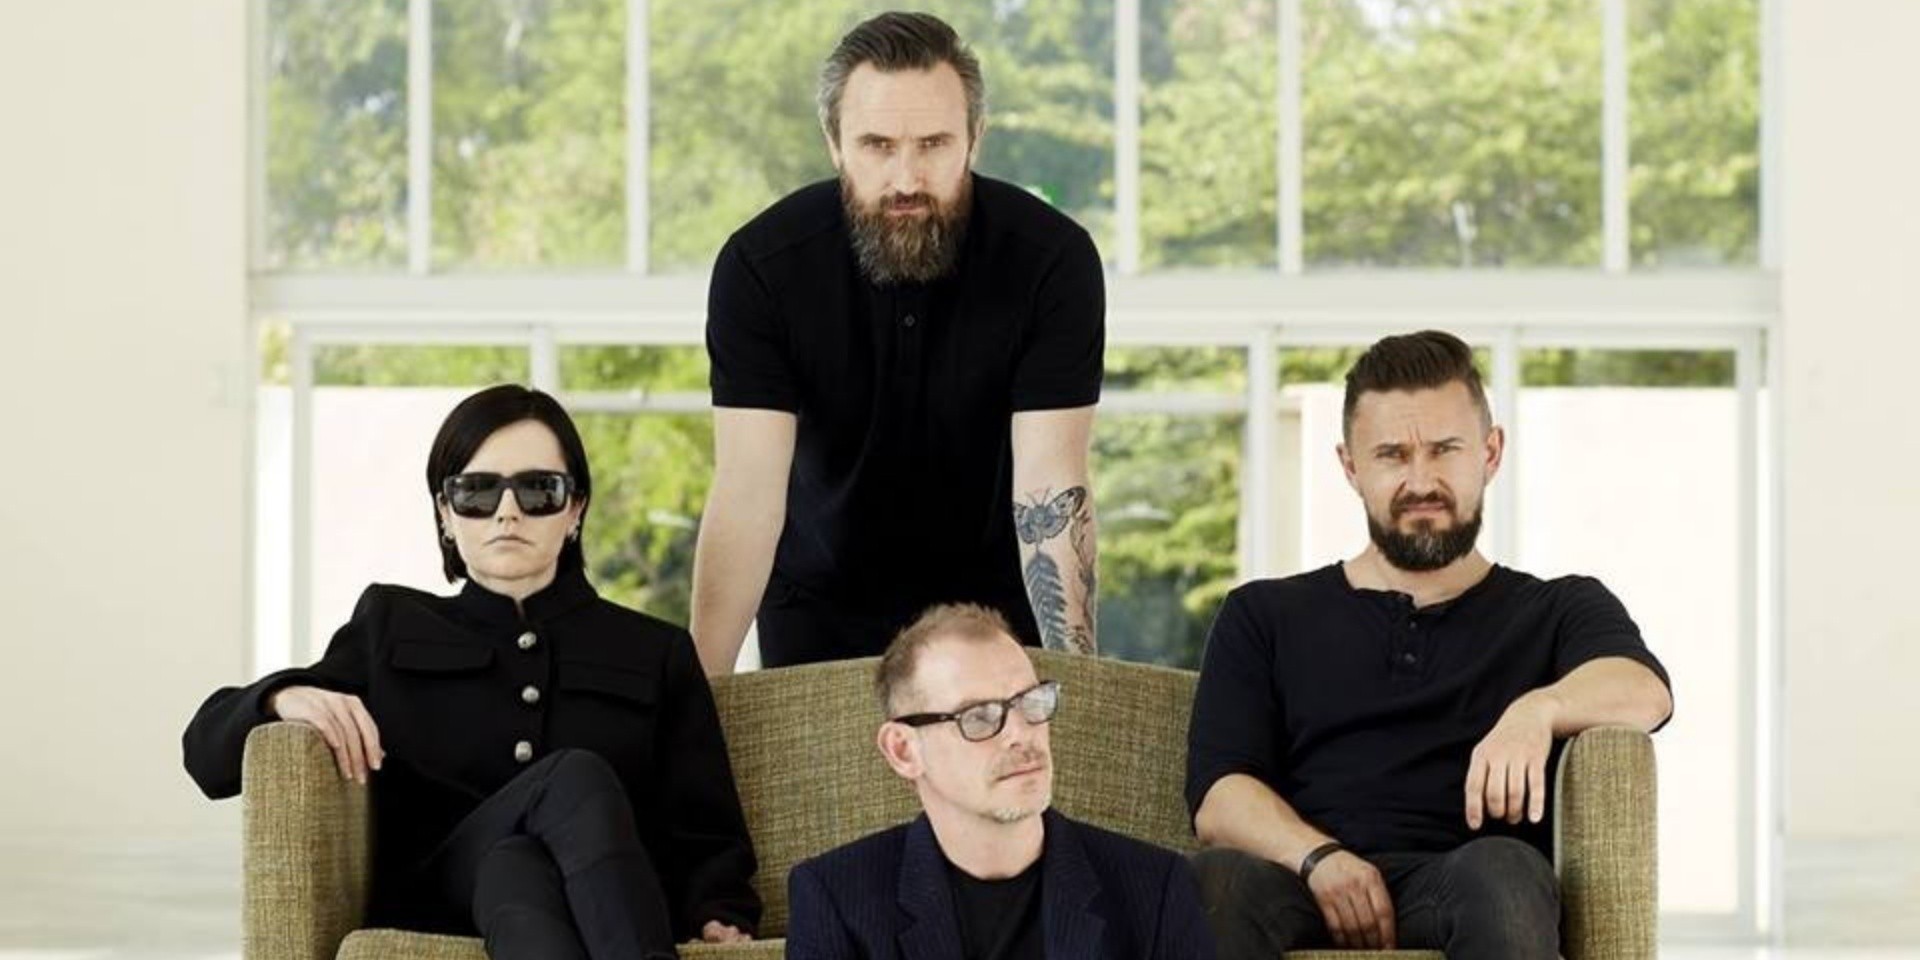 The Cranberries address escaping from abusive relationships in new music video for 'All Over Now' – watch